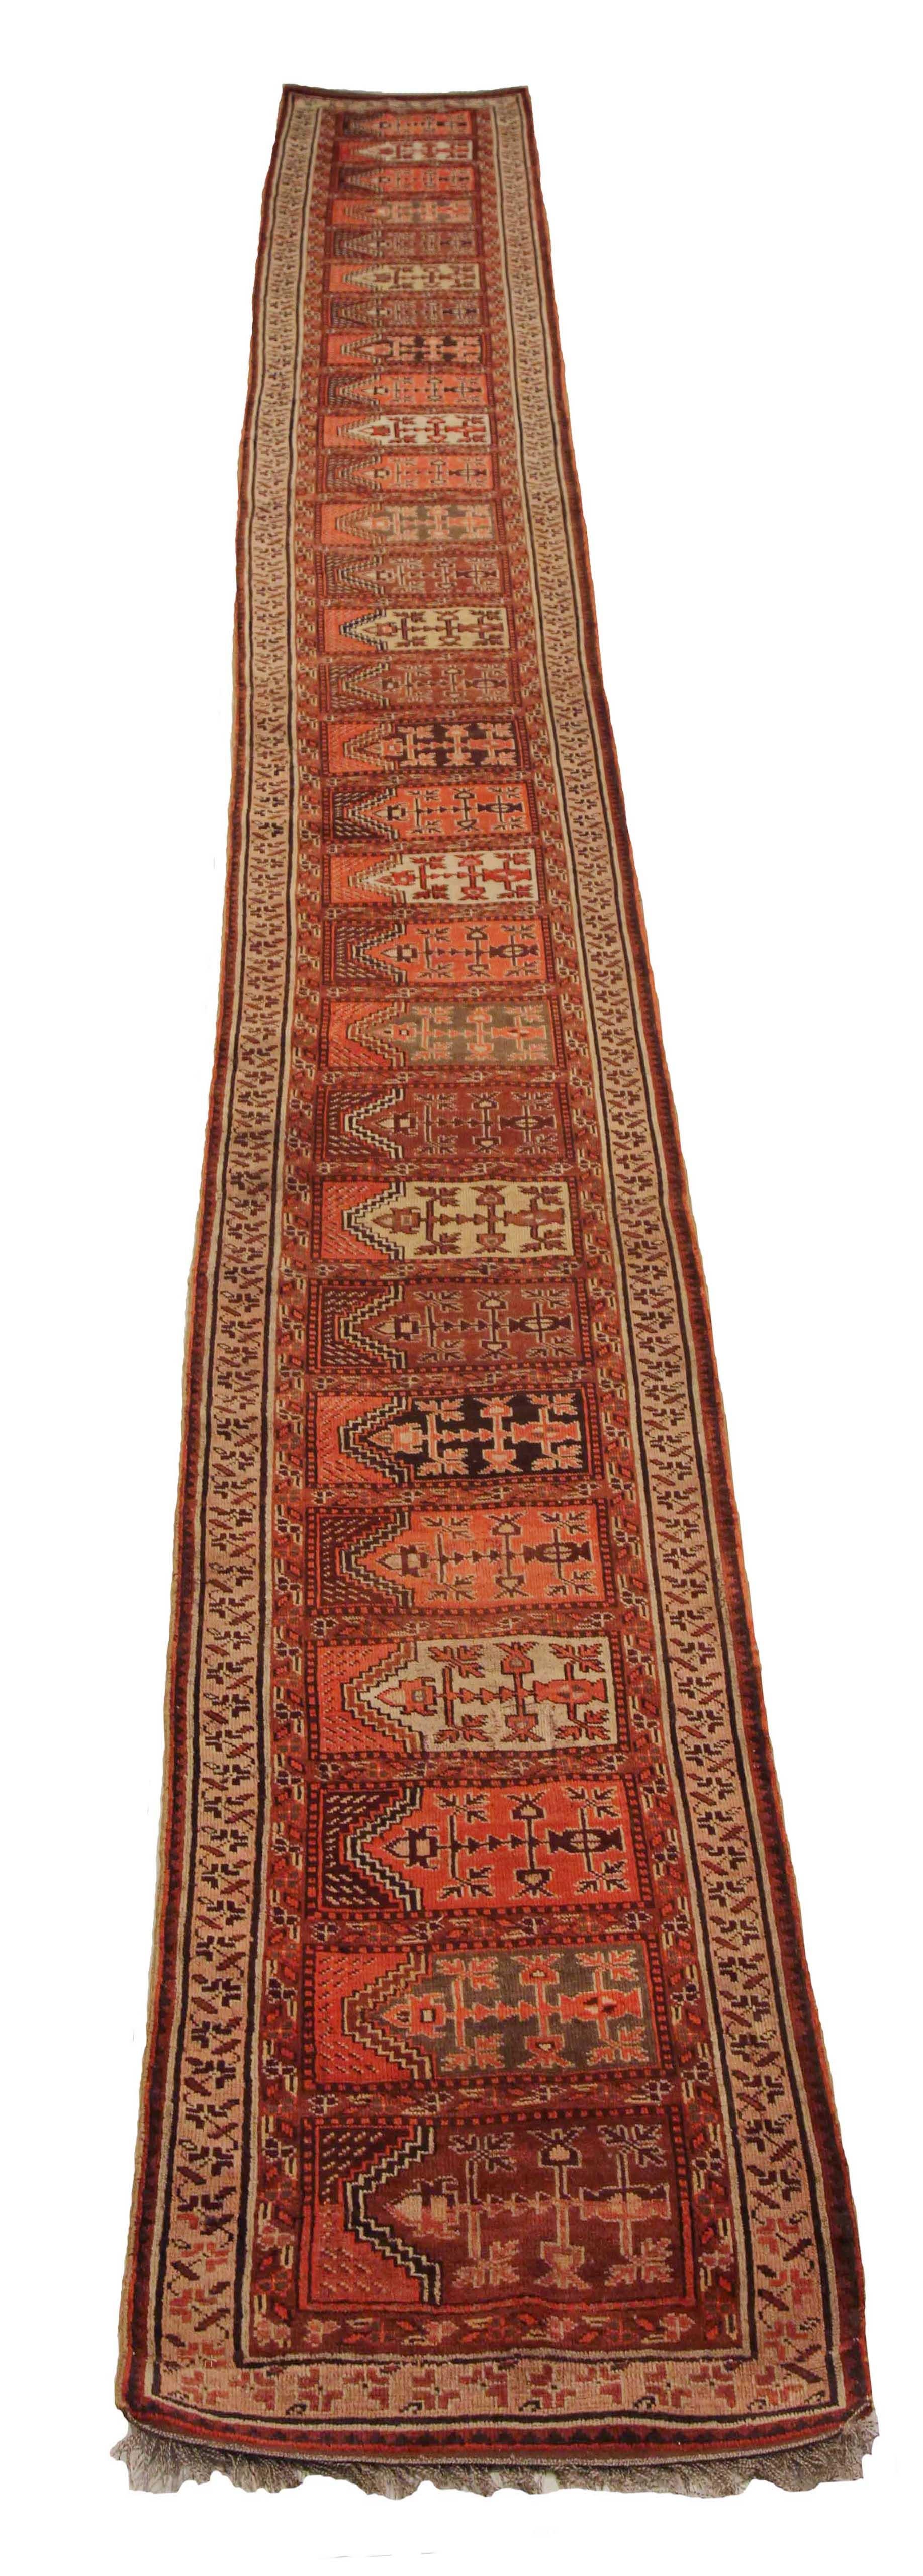 Antique Afghan runner rug handwoven from the finest sheep’s wool. It’s colored with all-natural vegetable dyes that are safe for humans and pets. It’s a traditional Bashir design handwoven by expert artisans. It’s a lovely runner rug that can be